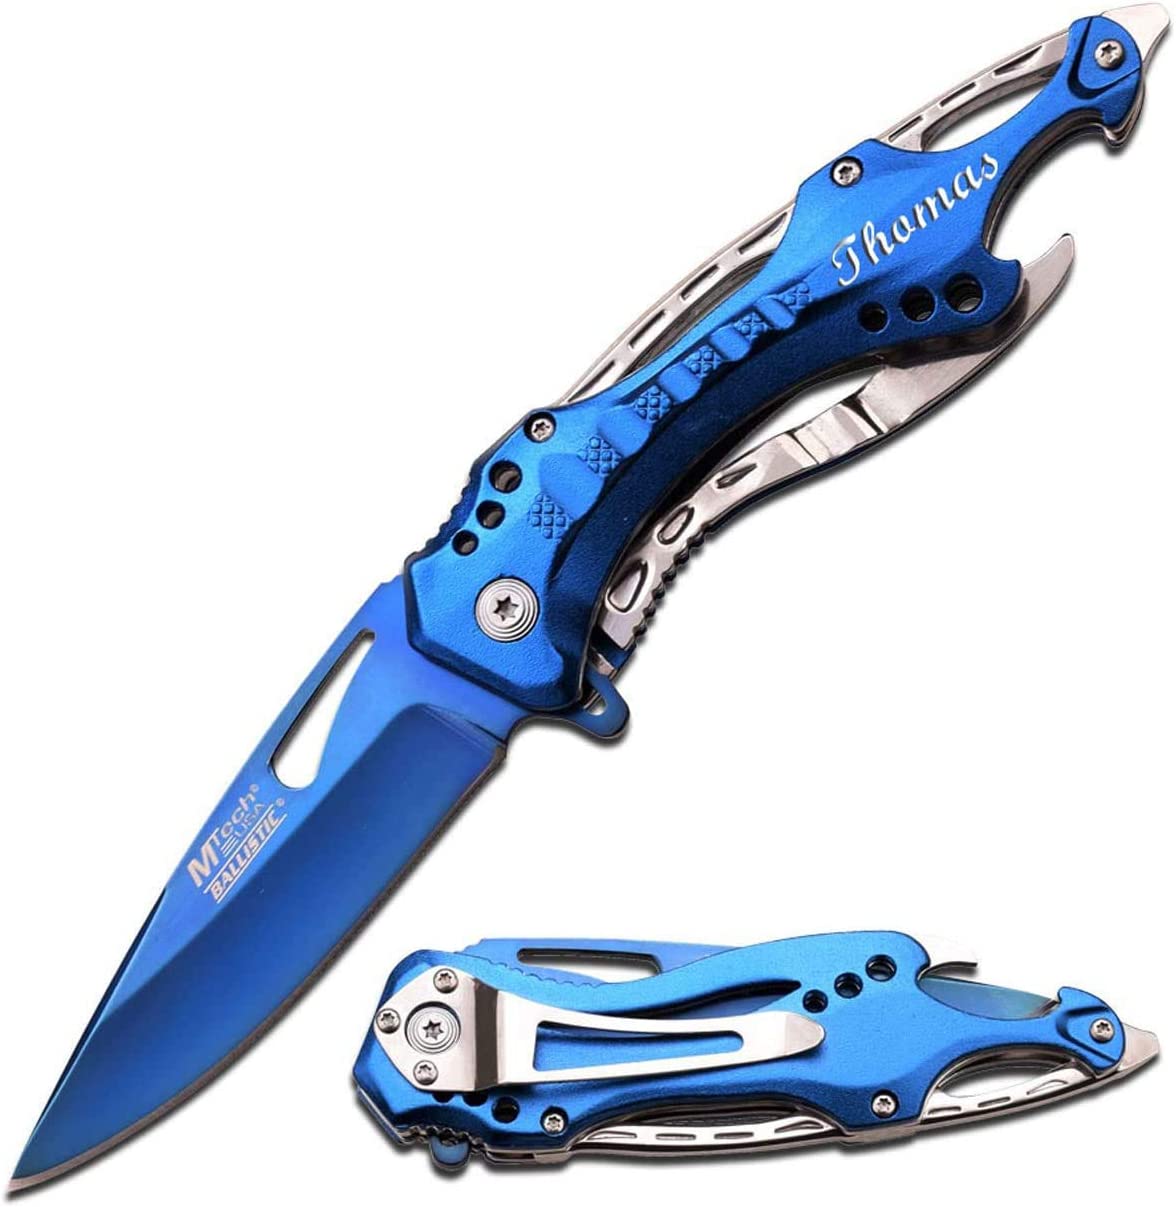 Personalized Laser Engraved Stainless Steel Blade & High Durability Pocket Knife